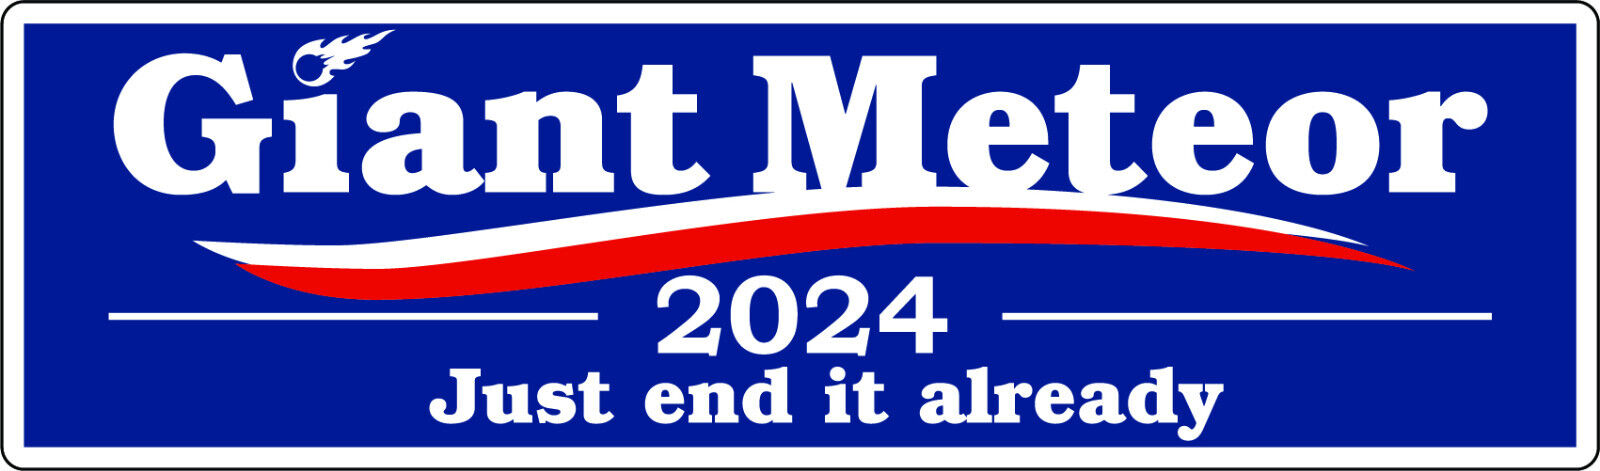 Blue Giant Meteor 2024 - Just end it already - Printed Decal / Sticker